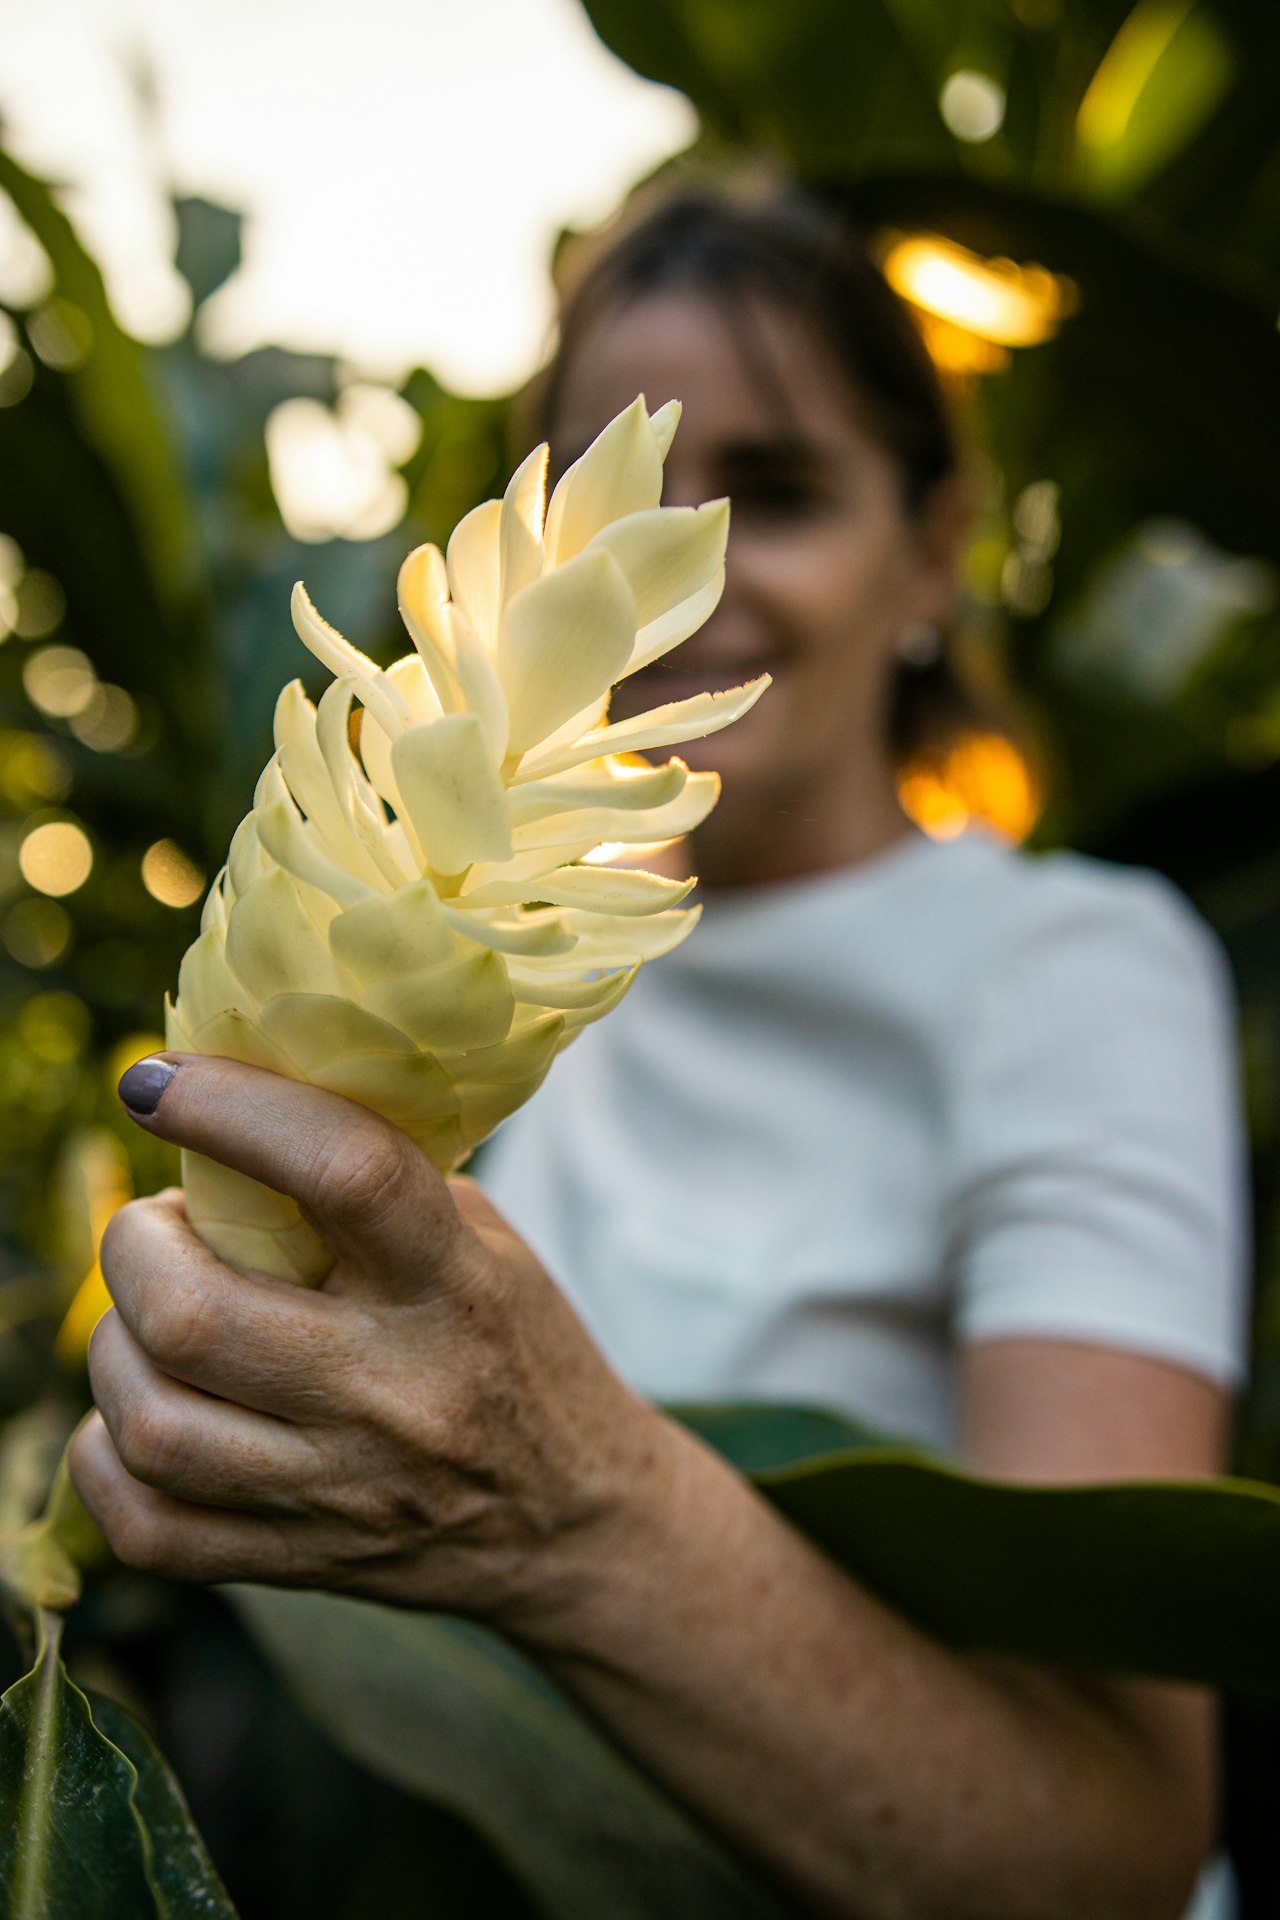 A woman in a white shirt holding a white blossom with large petals, standing amidst lush green foliage in soft-focus background during golden hour sunlight.